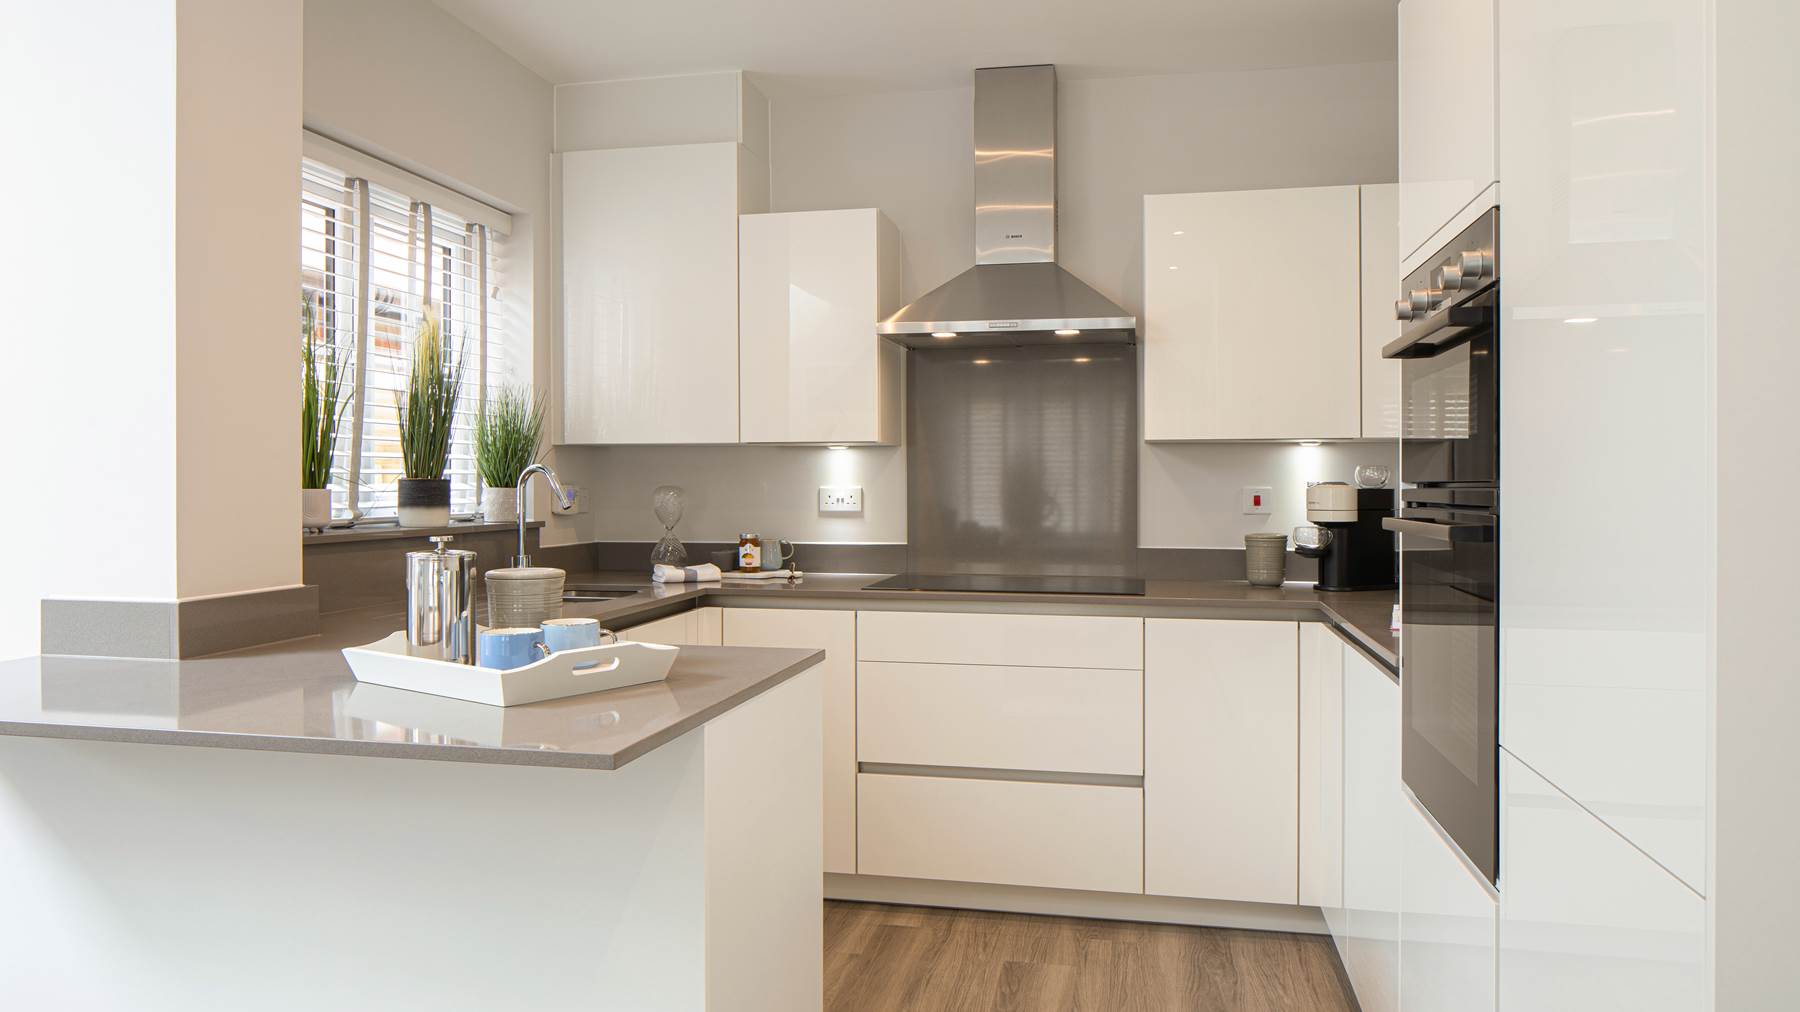 Kitchen of house for sale in Alton, Hampshire